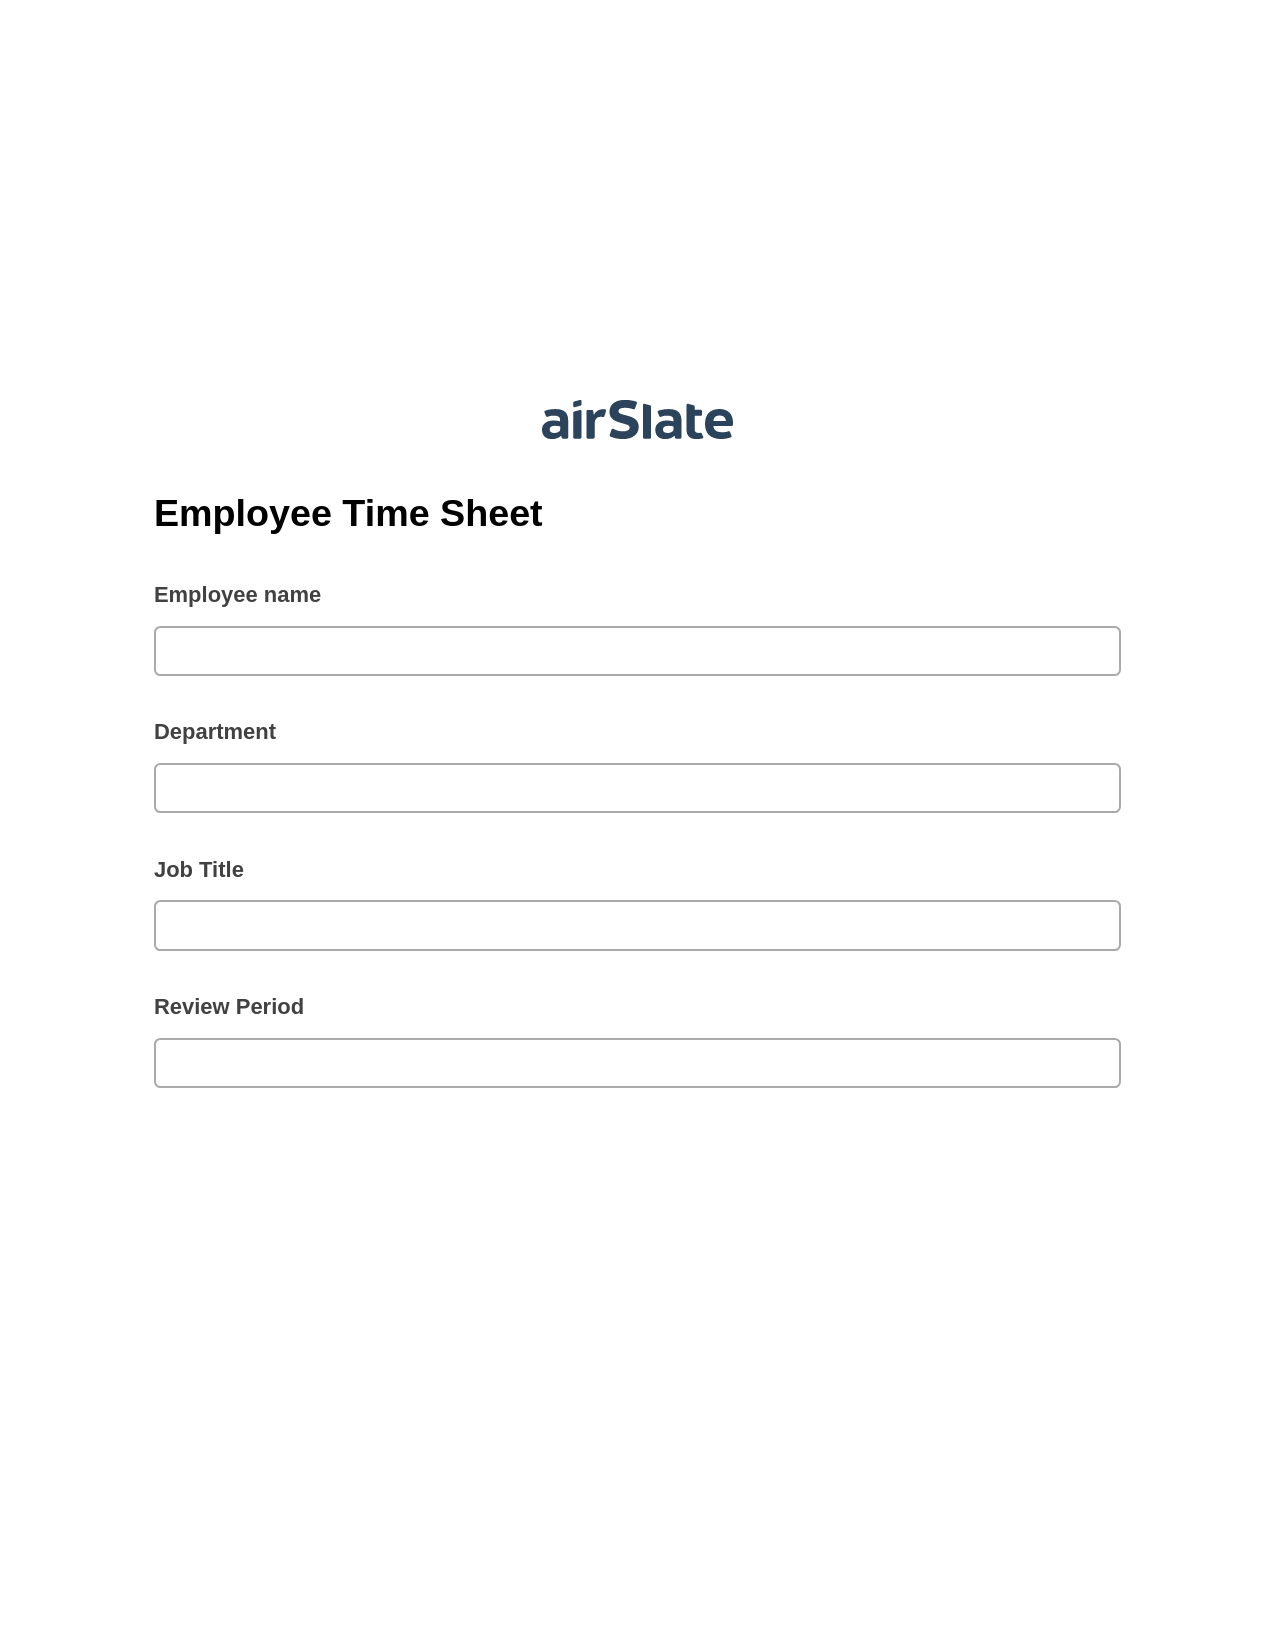 Multirole Employee Time Sheet Pre-fill Dropdowns from CSV file Bot, Create slate addon, Export to NetSuite Bot